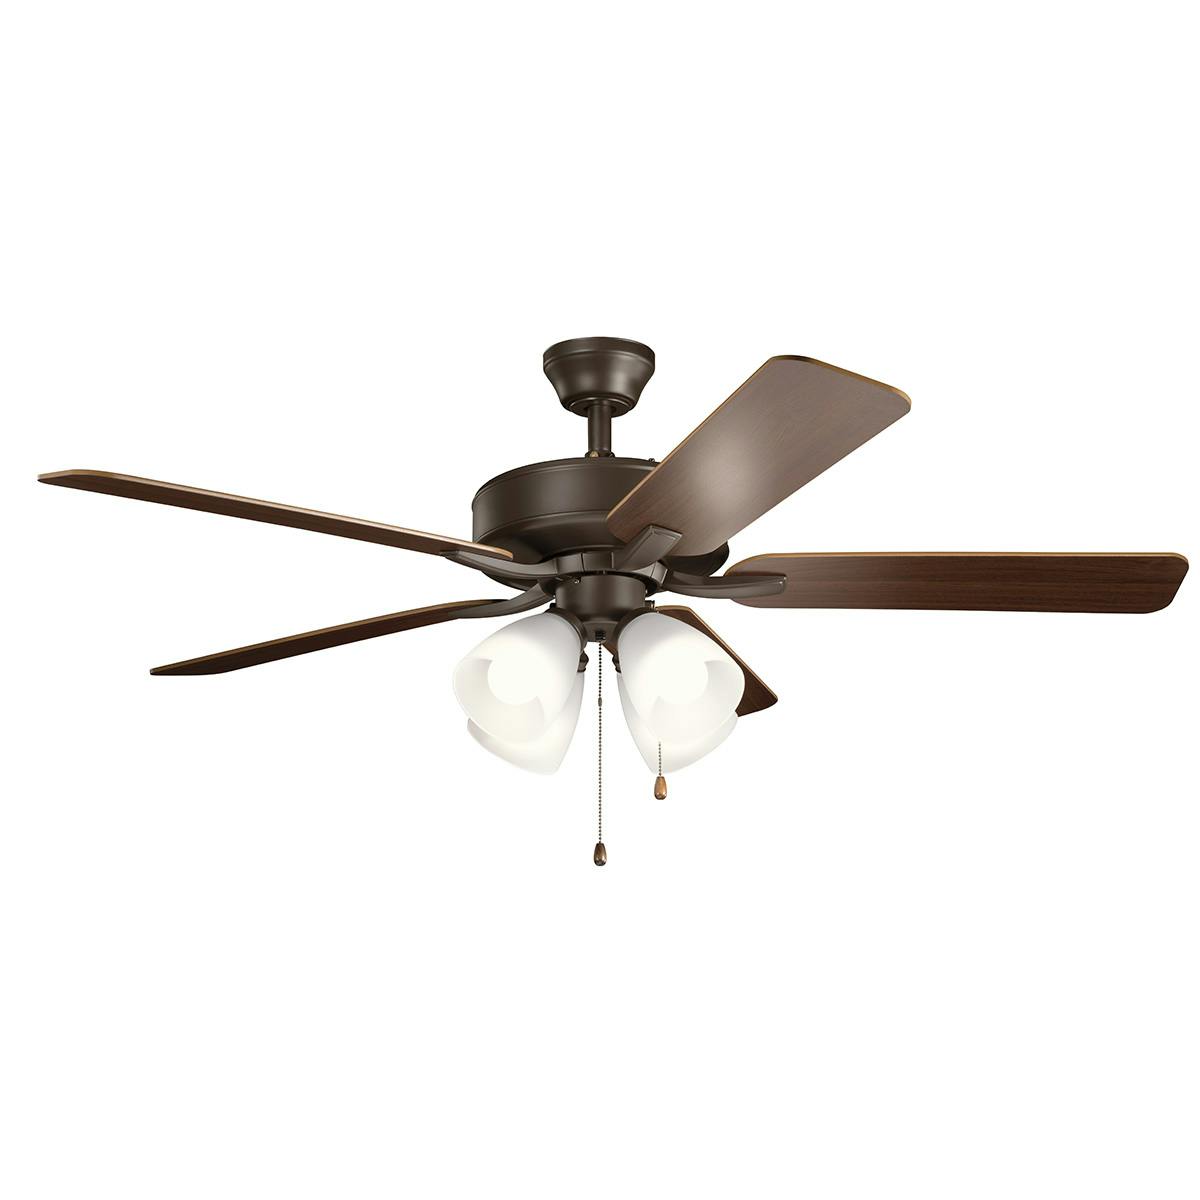 Basics Pro Premier Ceiling Fan 52" with 5 Satin Natural Bronze finish Blades with light at 3000K on white background